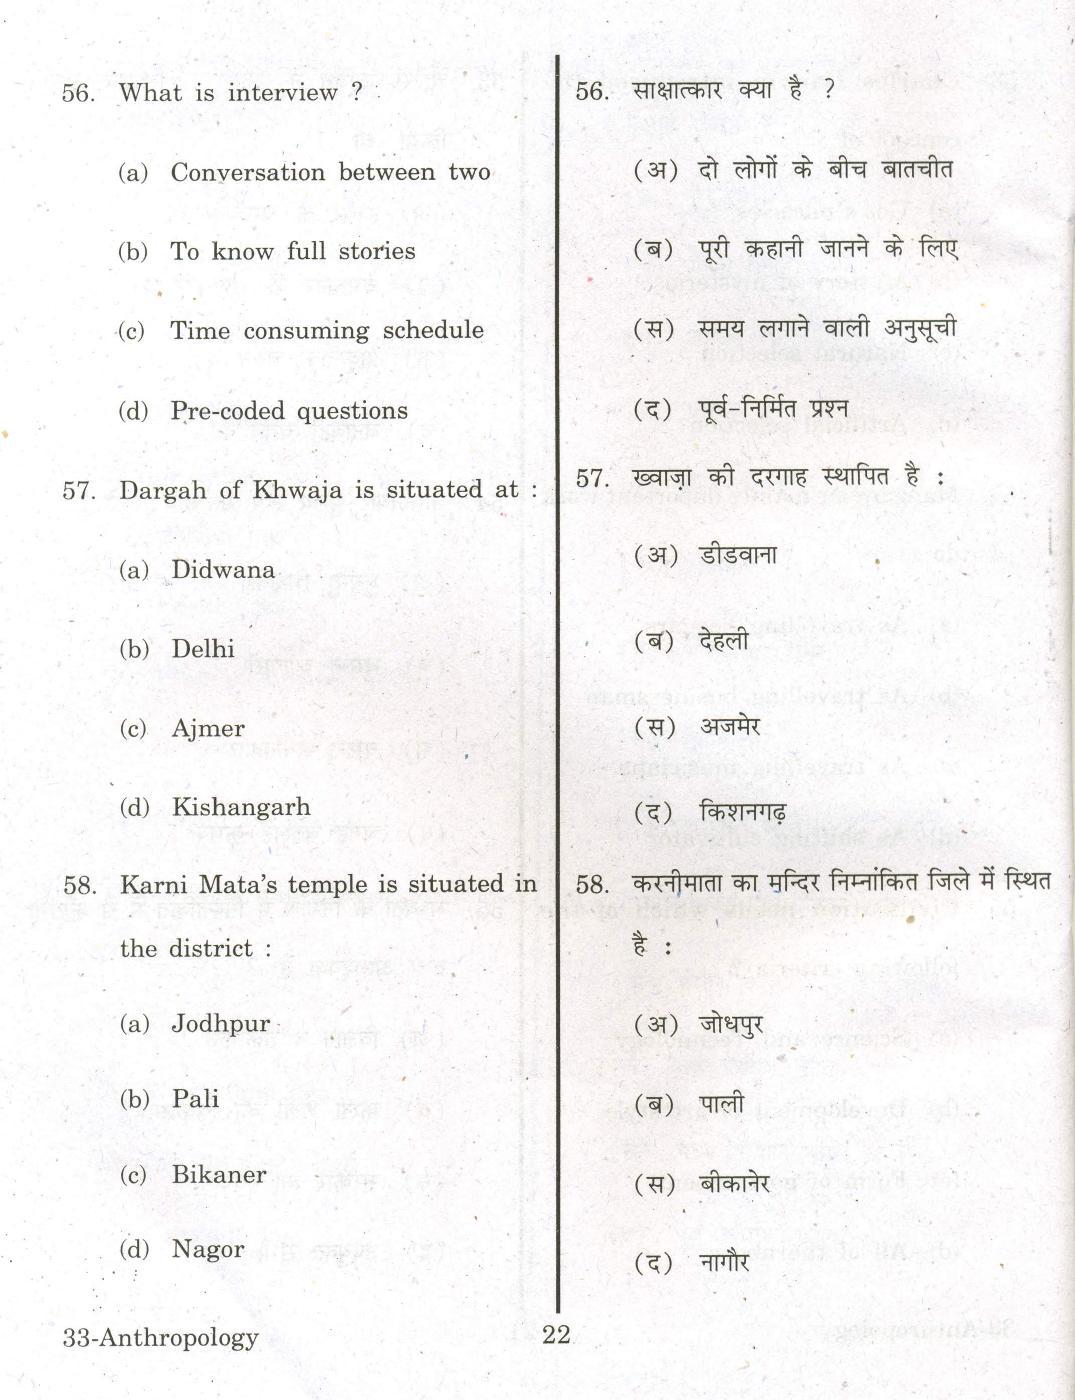 URATPG Anthropology 2013 Question Paper - Page 21